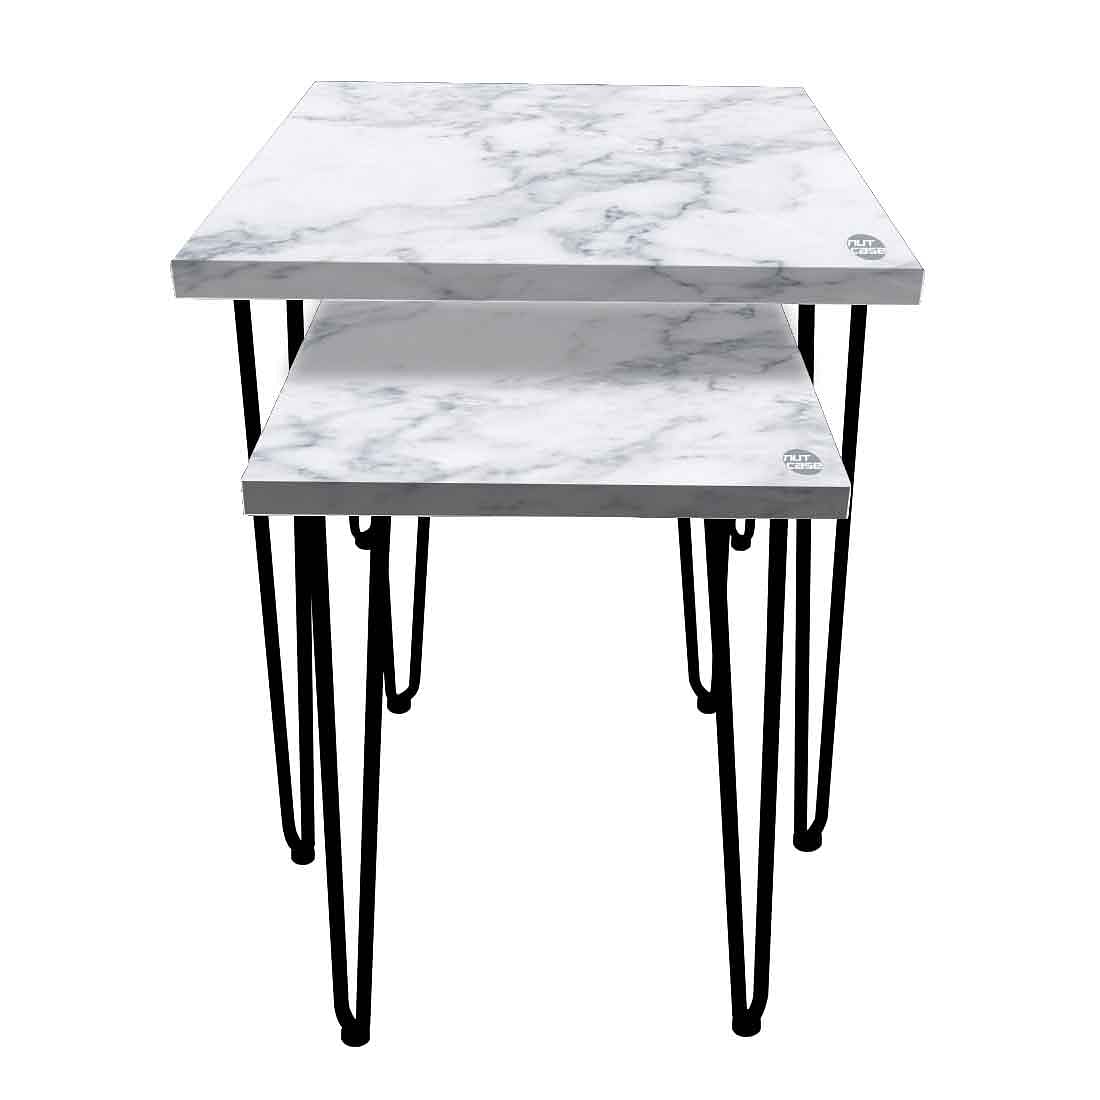 Patio Nesting Tables Set of 2 for Living Room Outdoors & Office - White Marble Nutcase